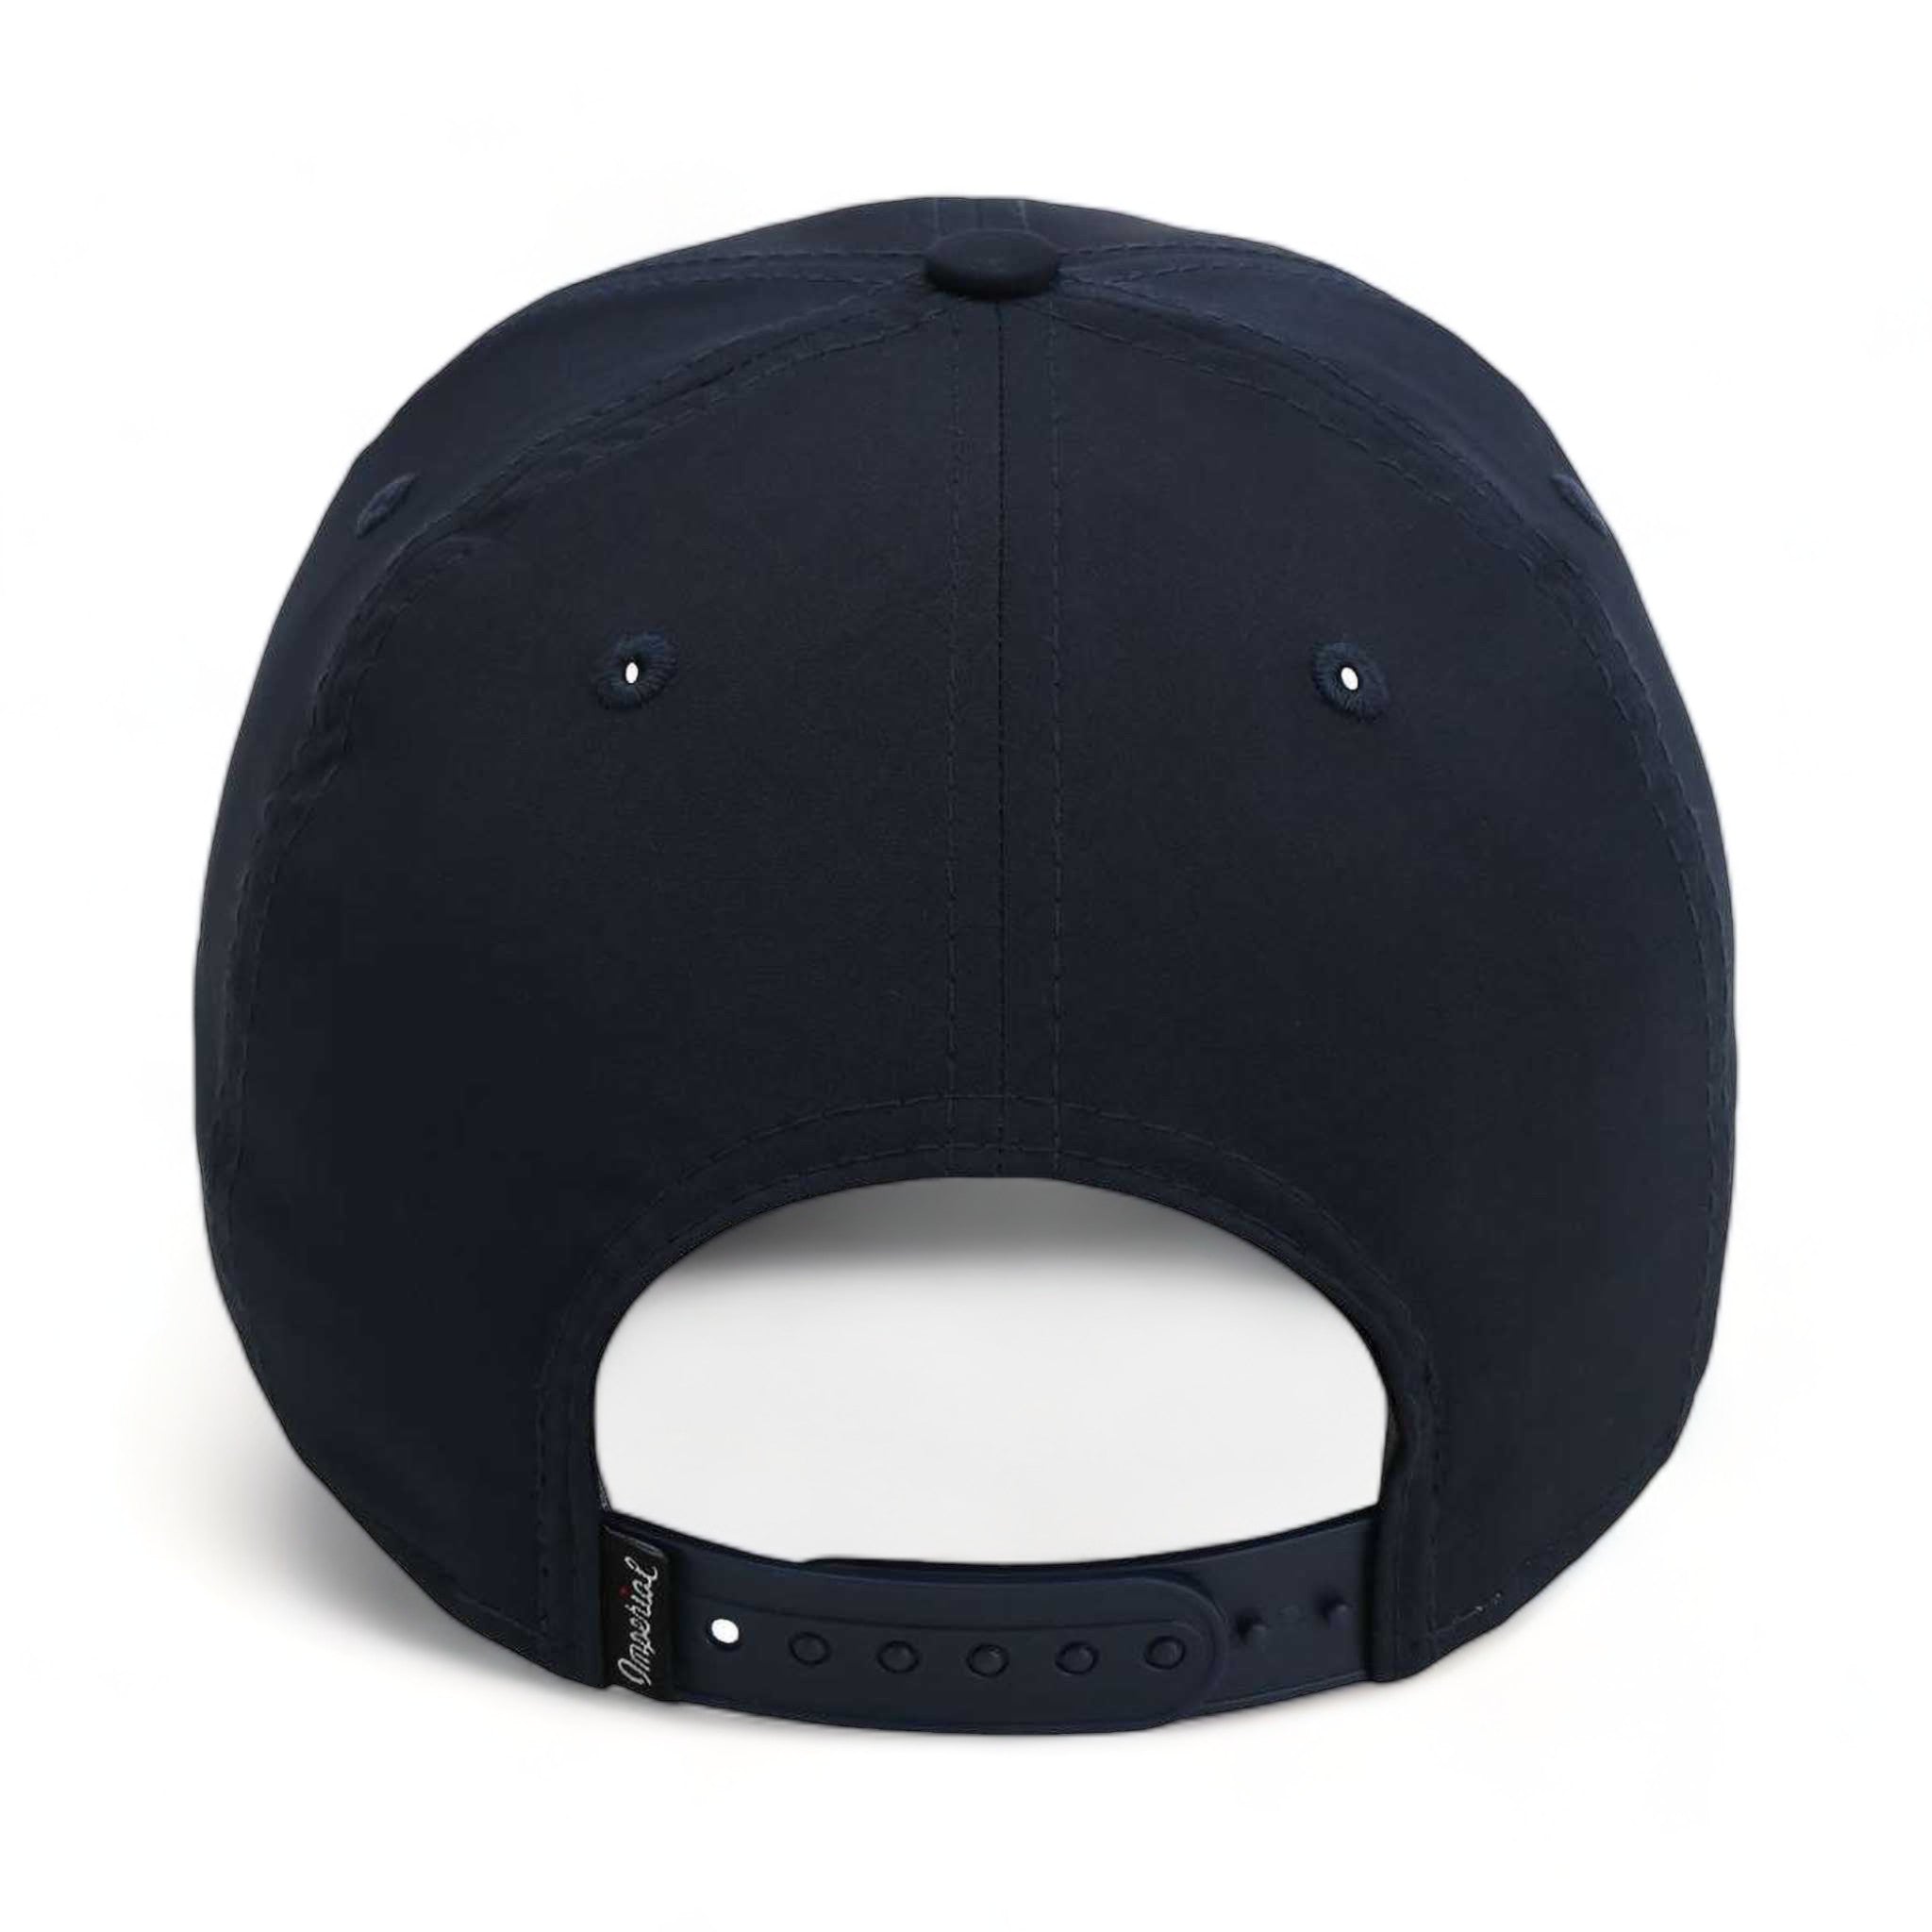 Back view of Imperial 7054 custom hat in navy and white